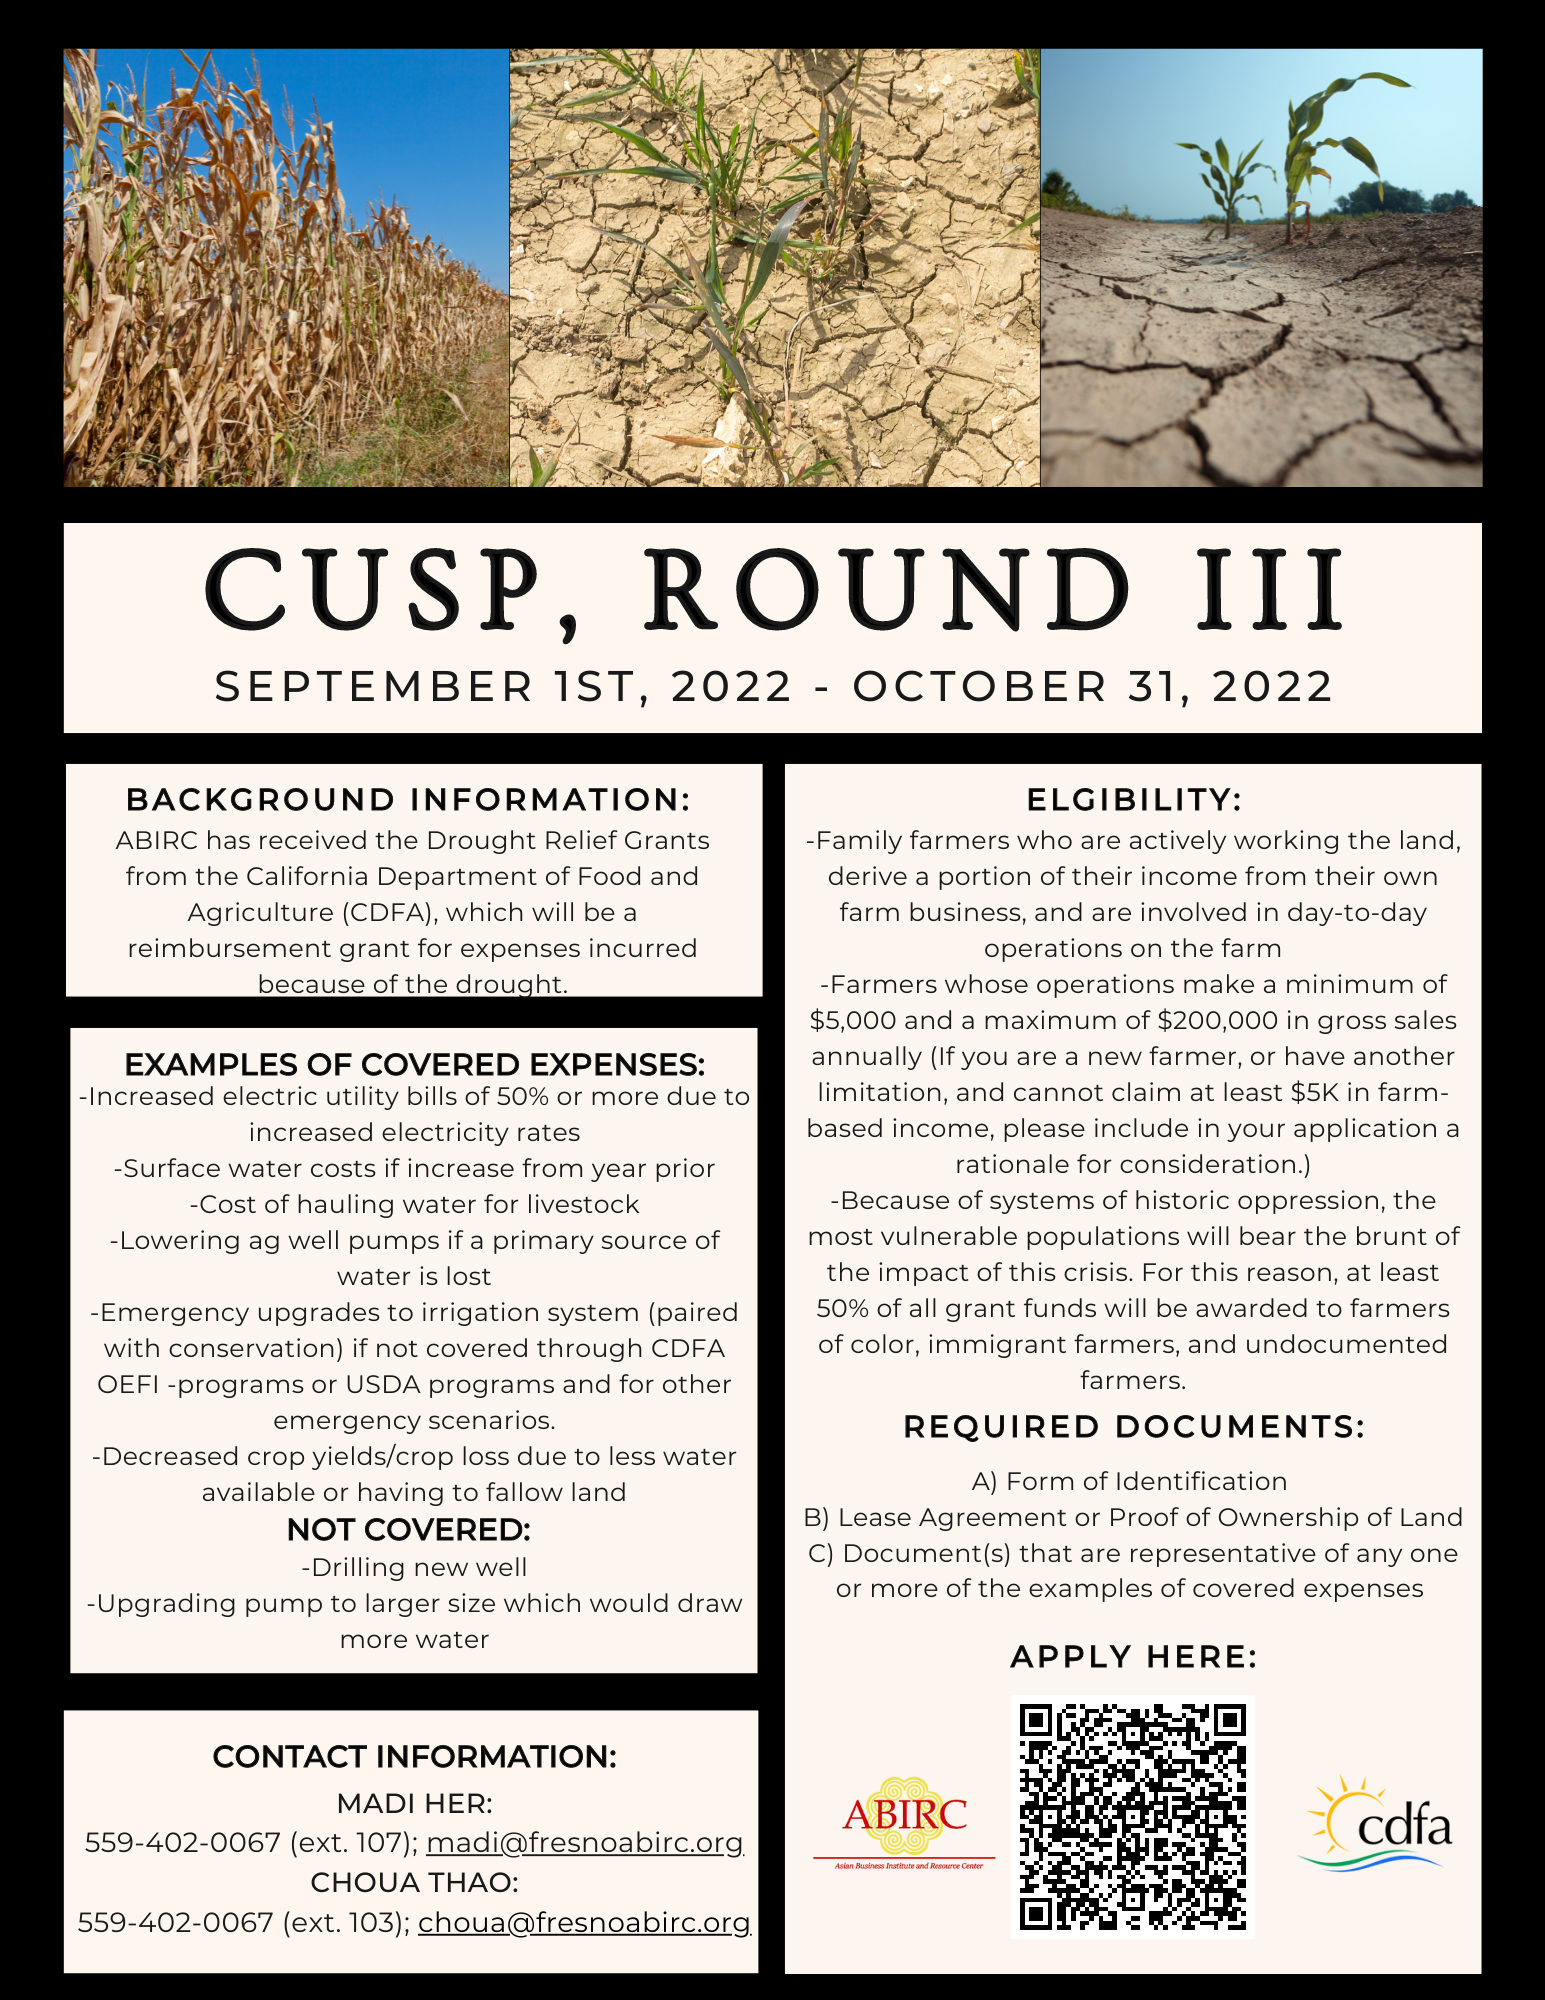 CUSP, Round III (Official)